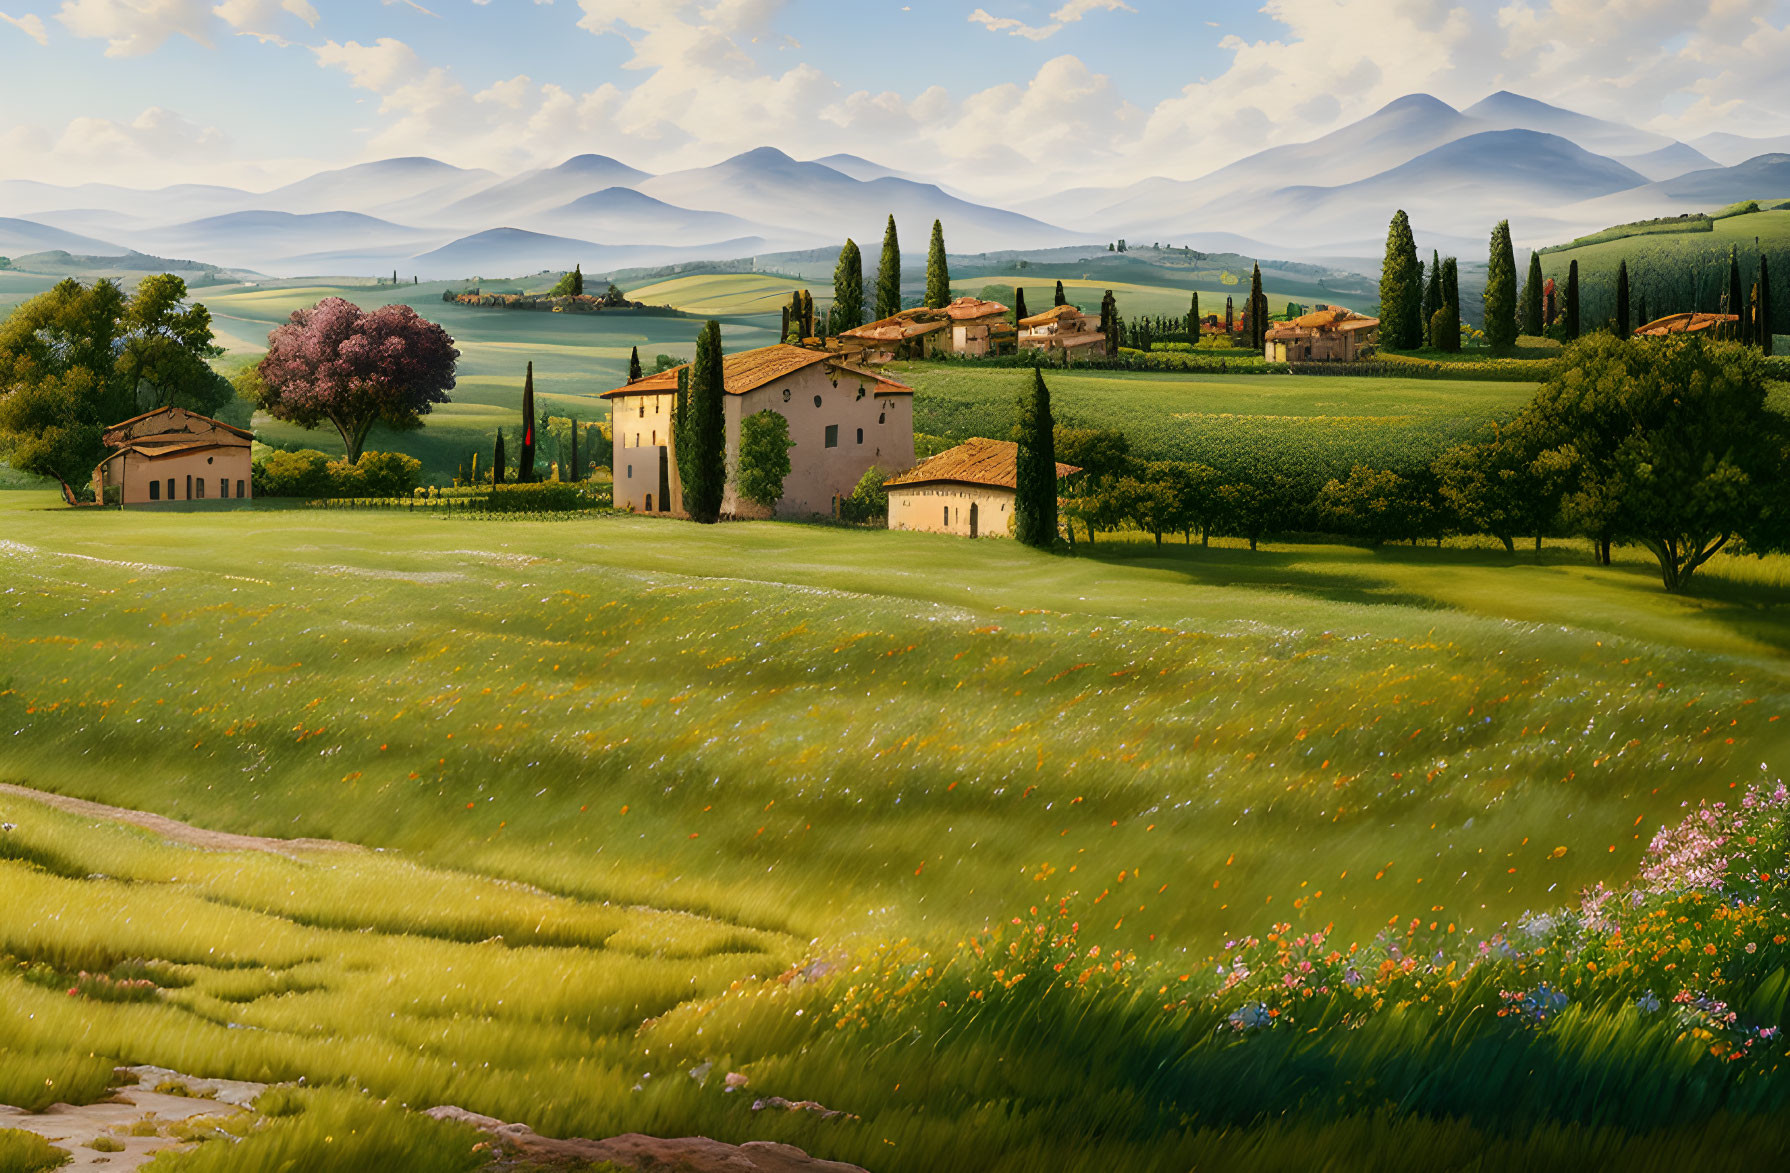 Picturesque Tuscan landscape: rolling hills, green fields, wildflowers, rustic houses, clear blue